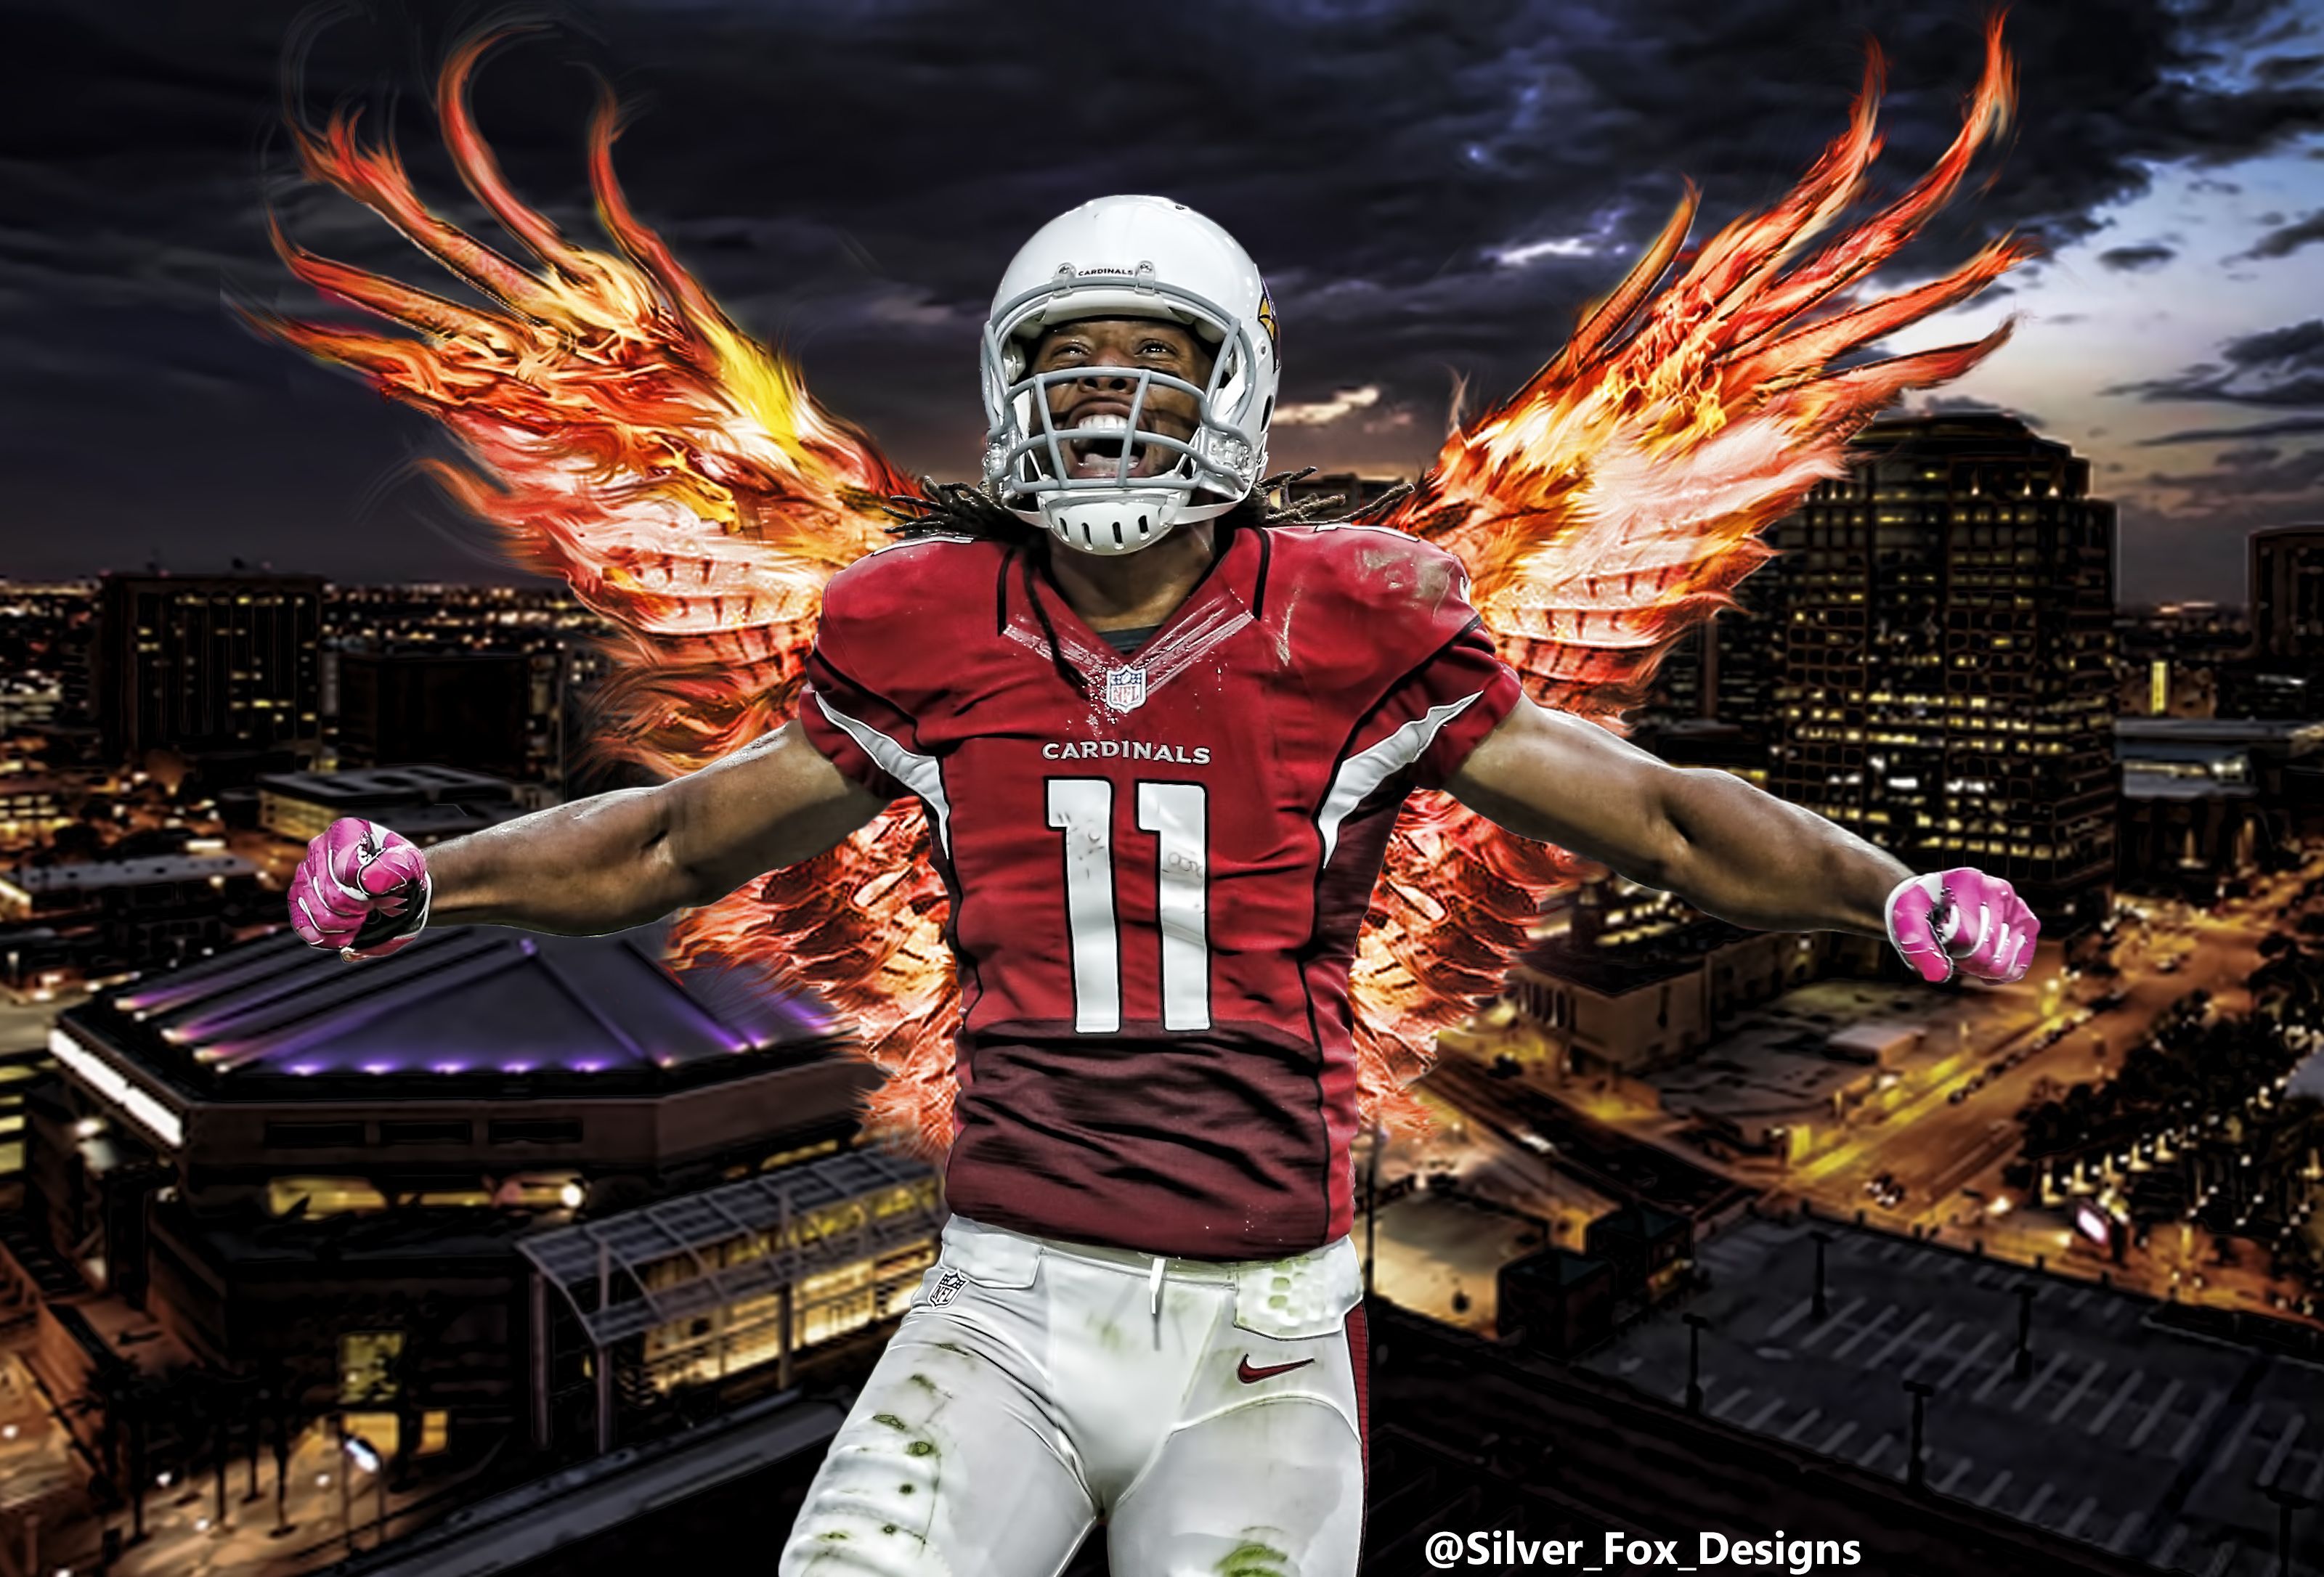 Larry Fitzgerald Wallpapers.